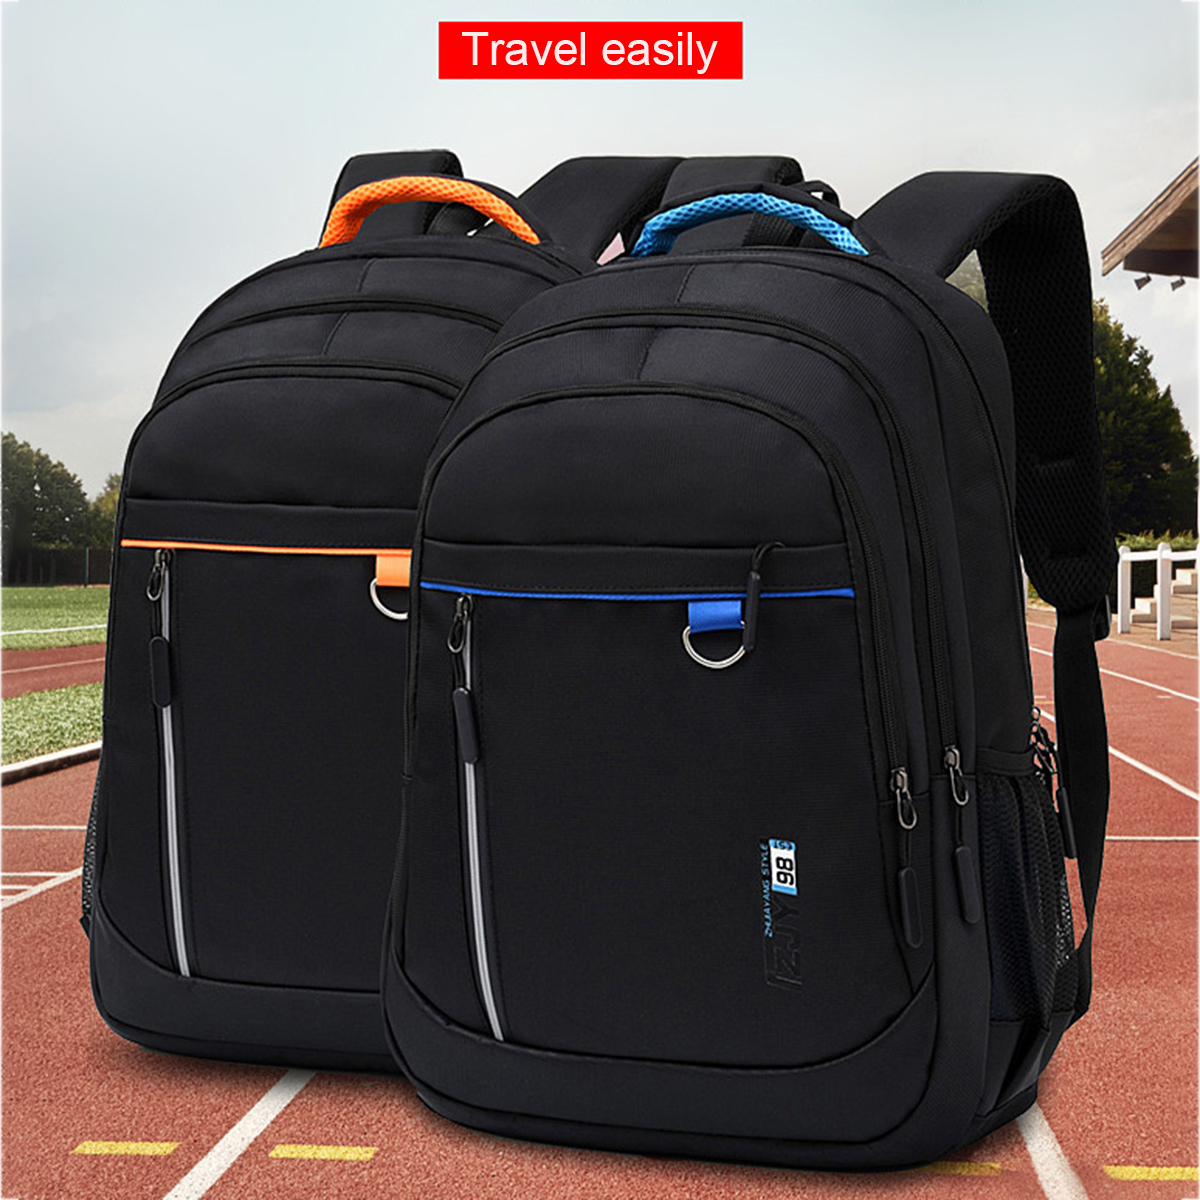 Casual-156inch-Backpack-Anti-Theft-Waterproof-15inch-Laptop-Bag-Camping-Travel-Rucksack-1693814-9